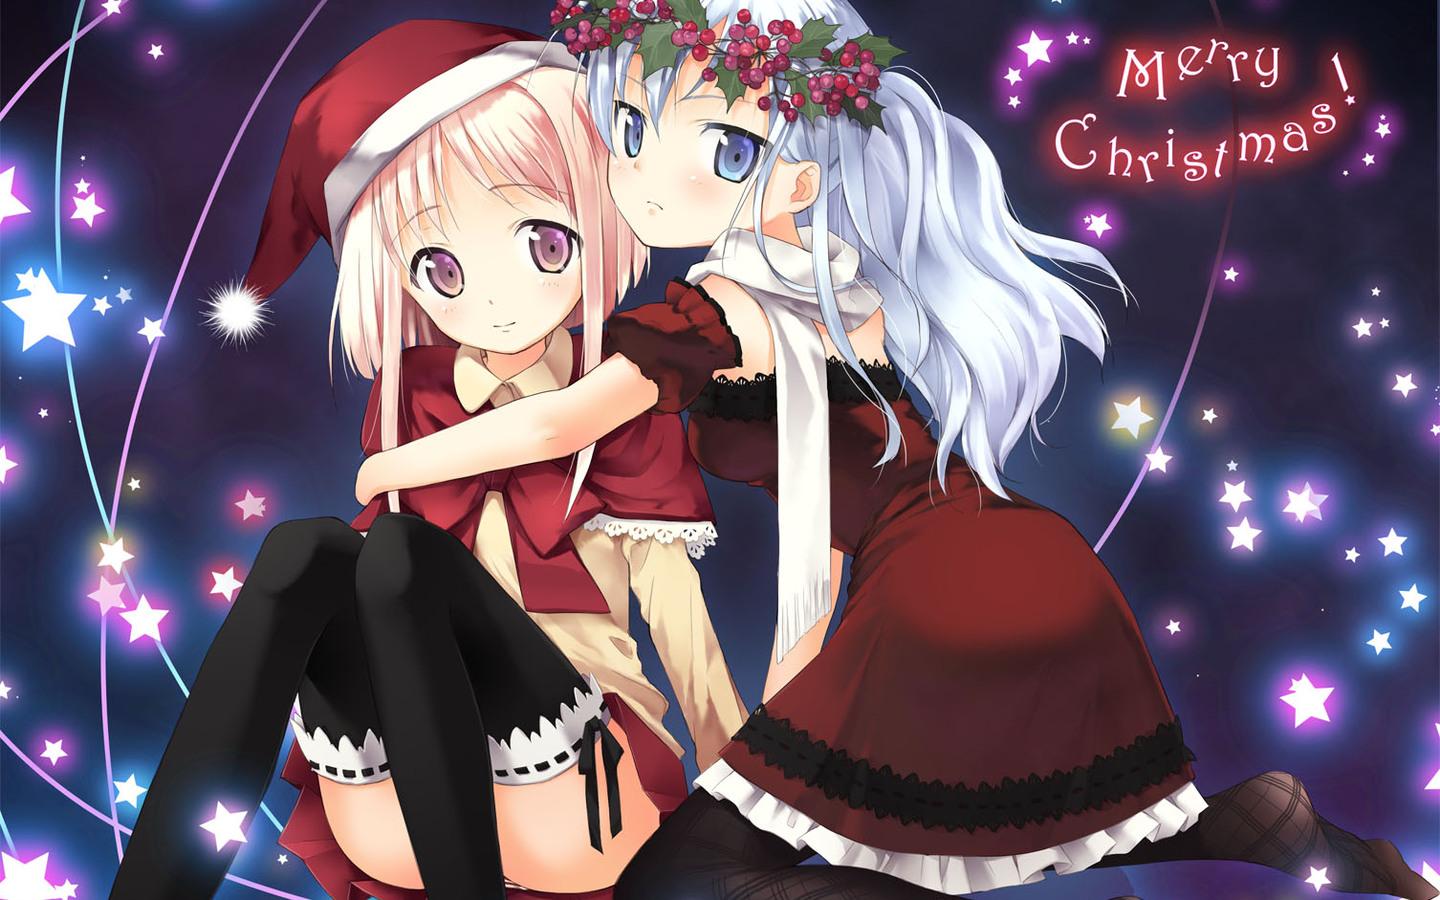 Free Cute Anime Girl in Christmas Picture wallpaper